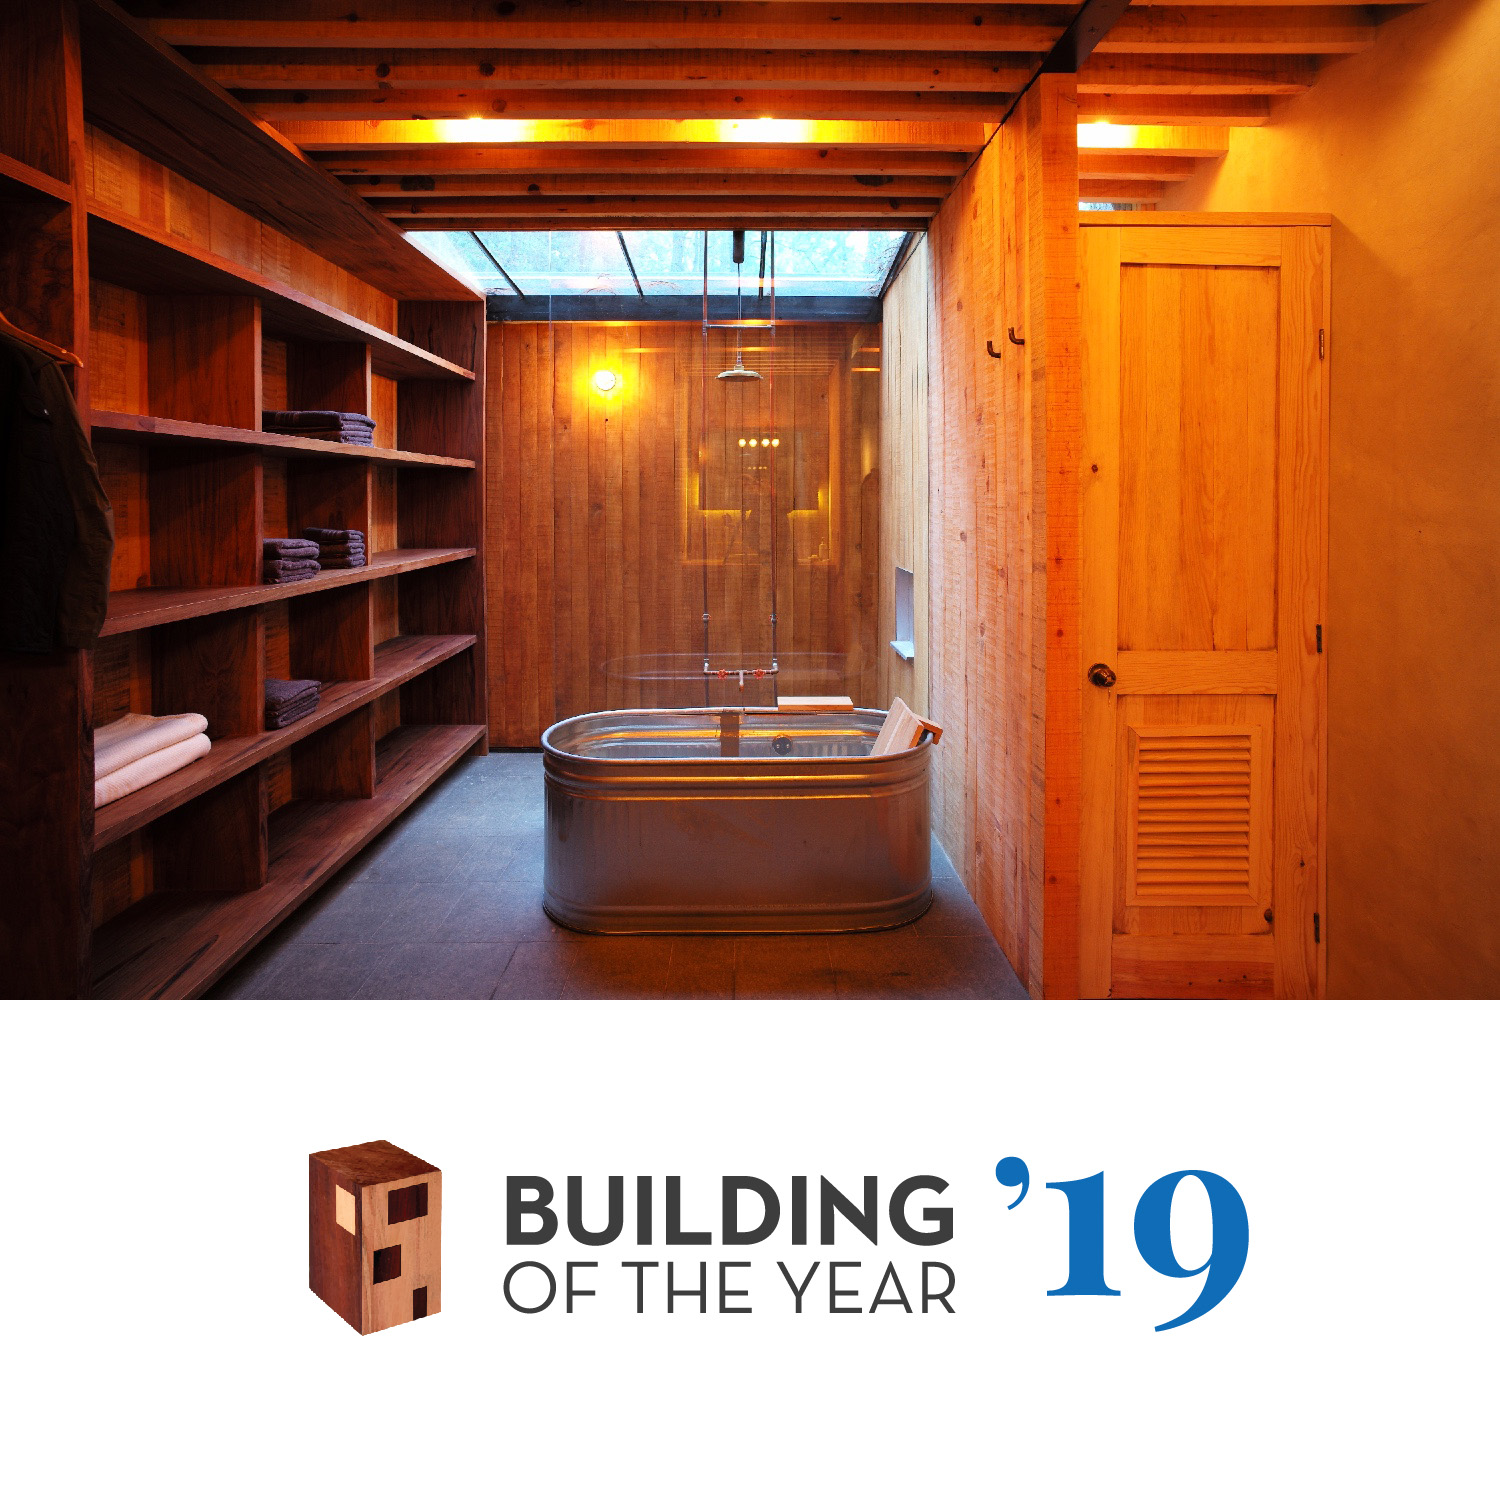 ArchDaily Builing of the Year 2019